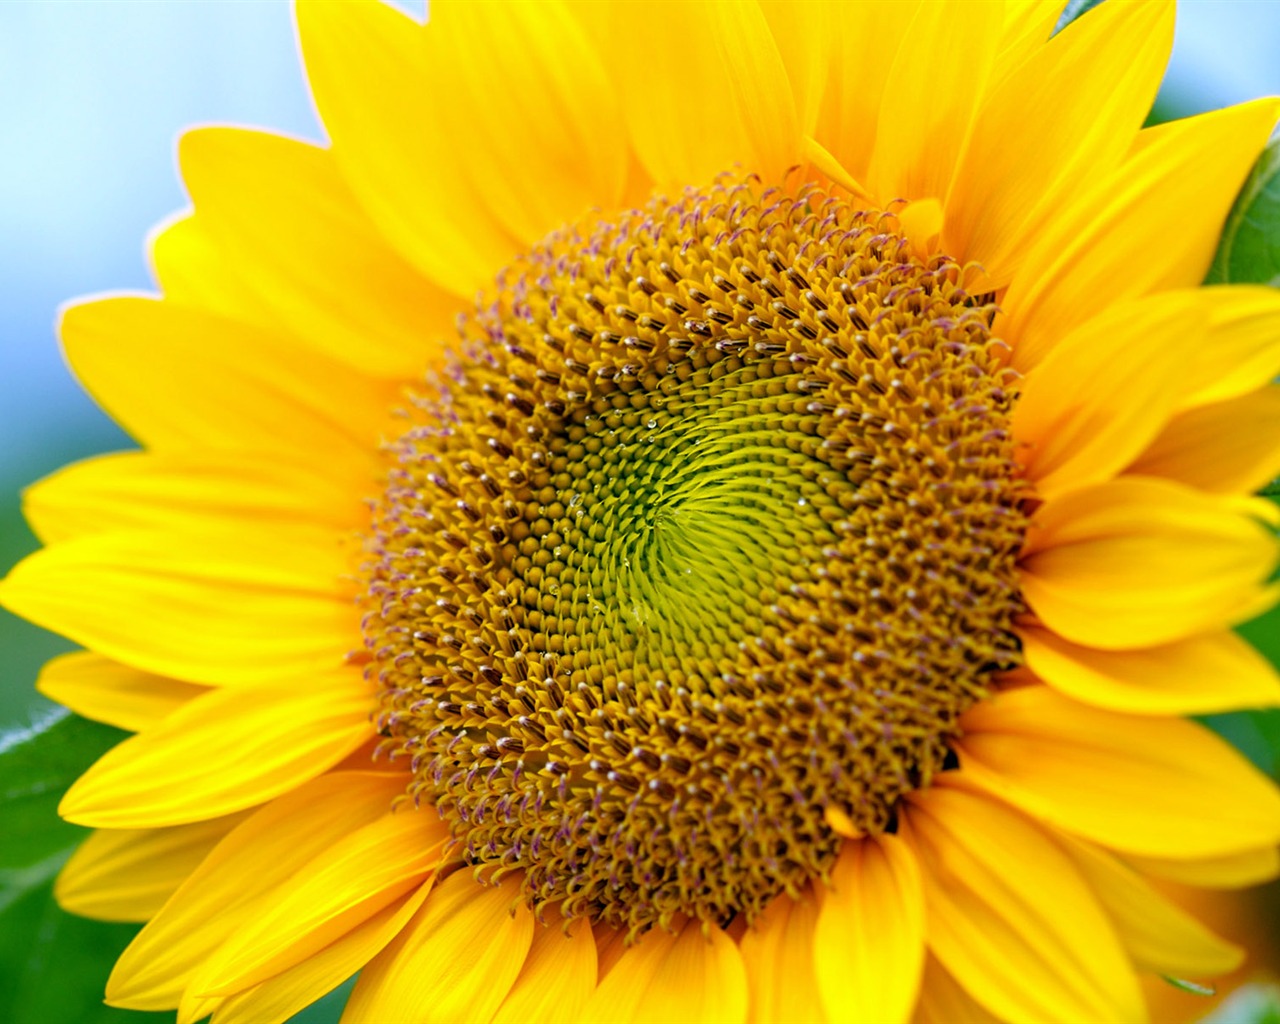 Sunny sunflower photo HD Wallpapers #7 - 1280x1024